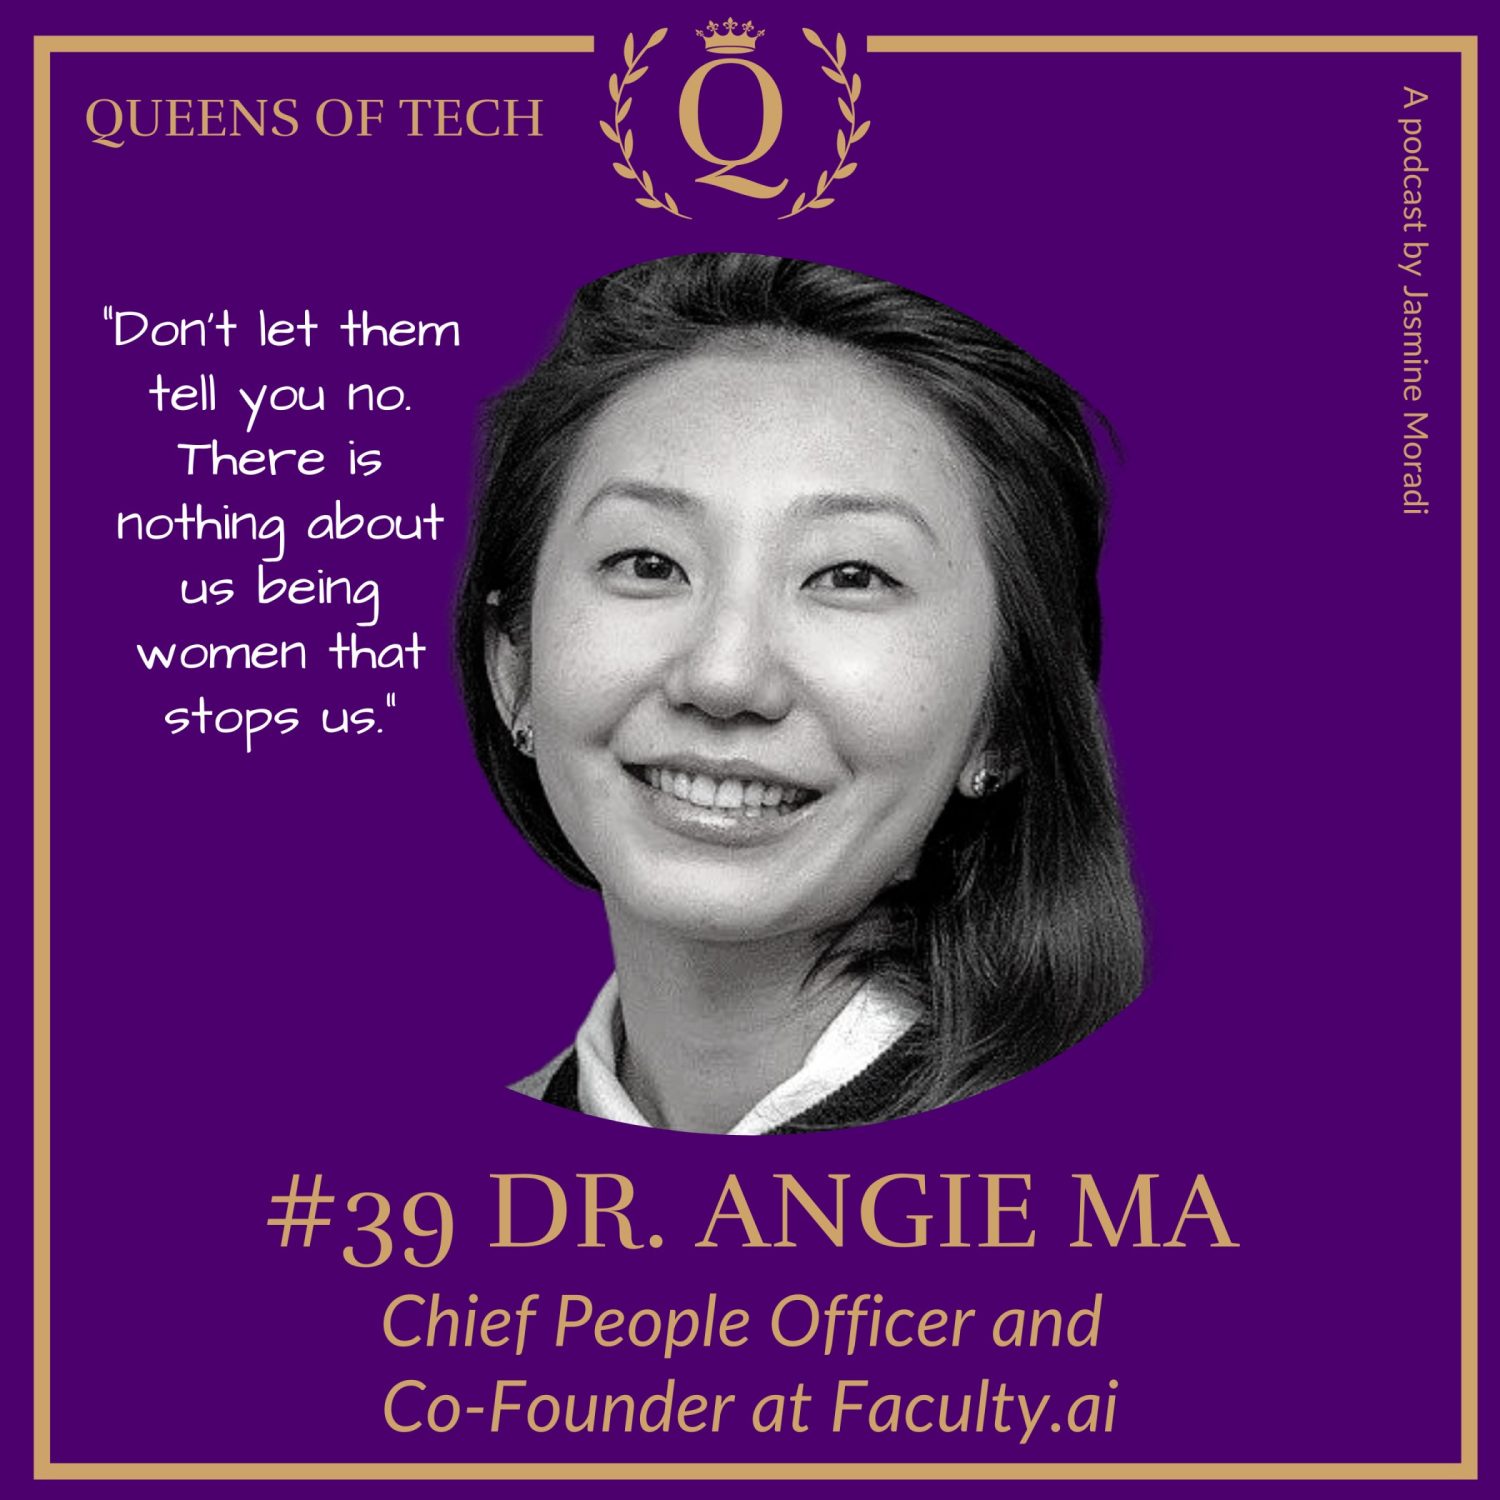 Queens of Tech-Dr.Angie-Ma